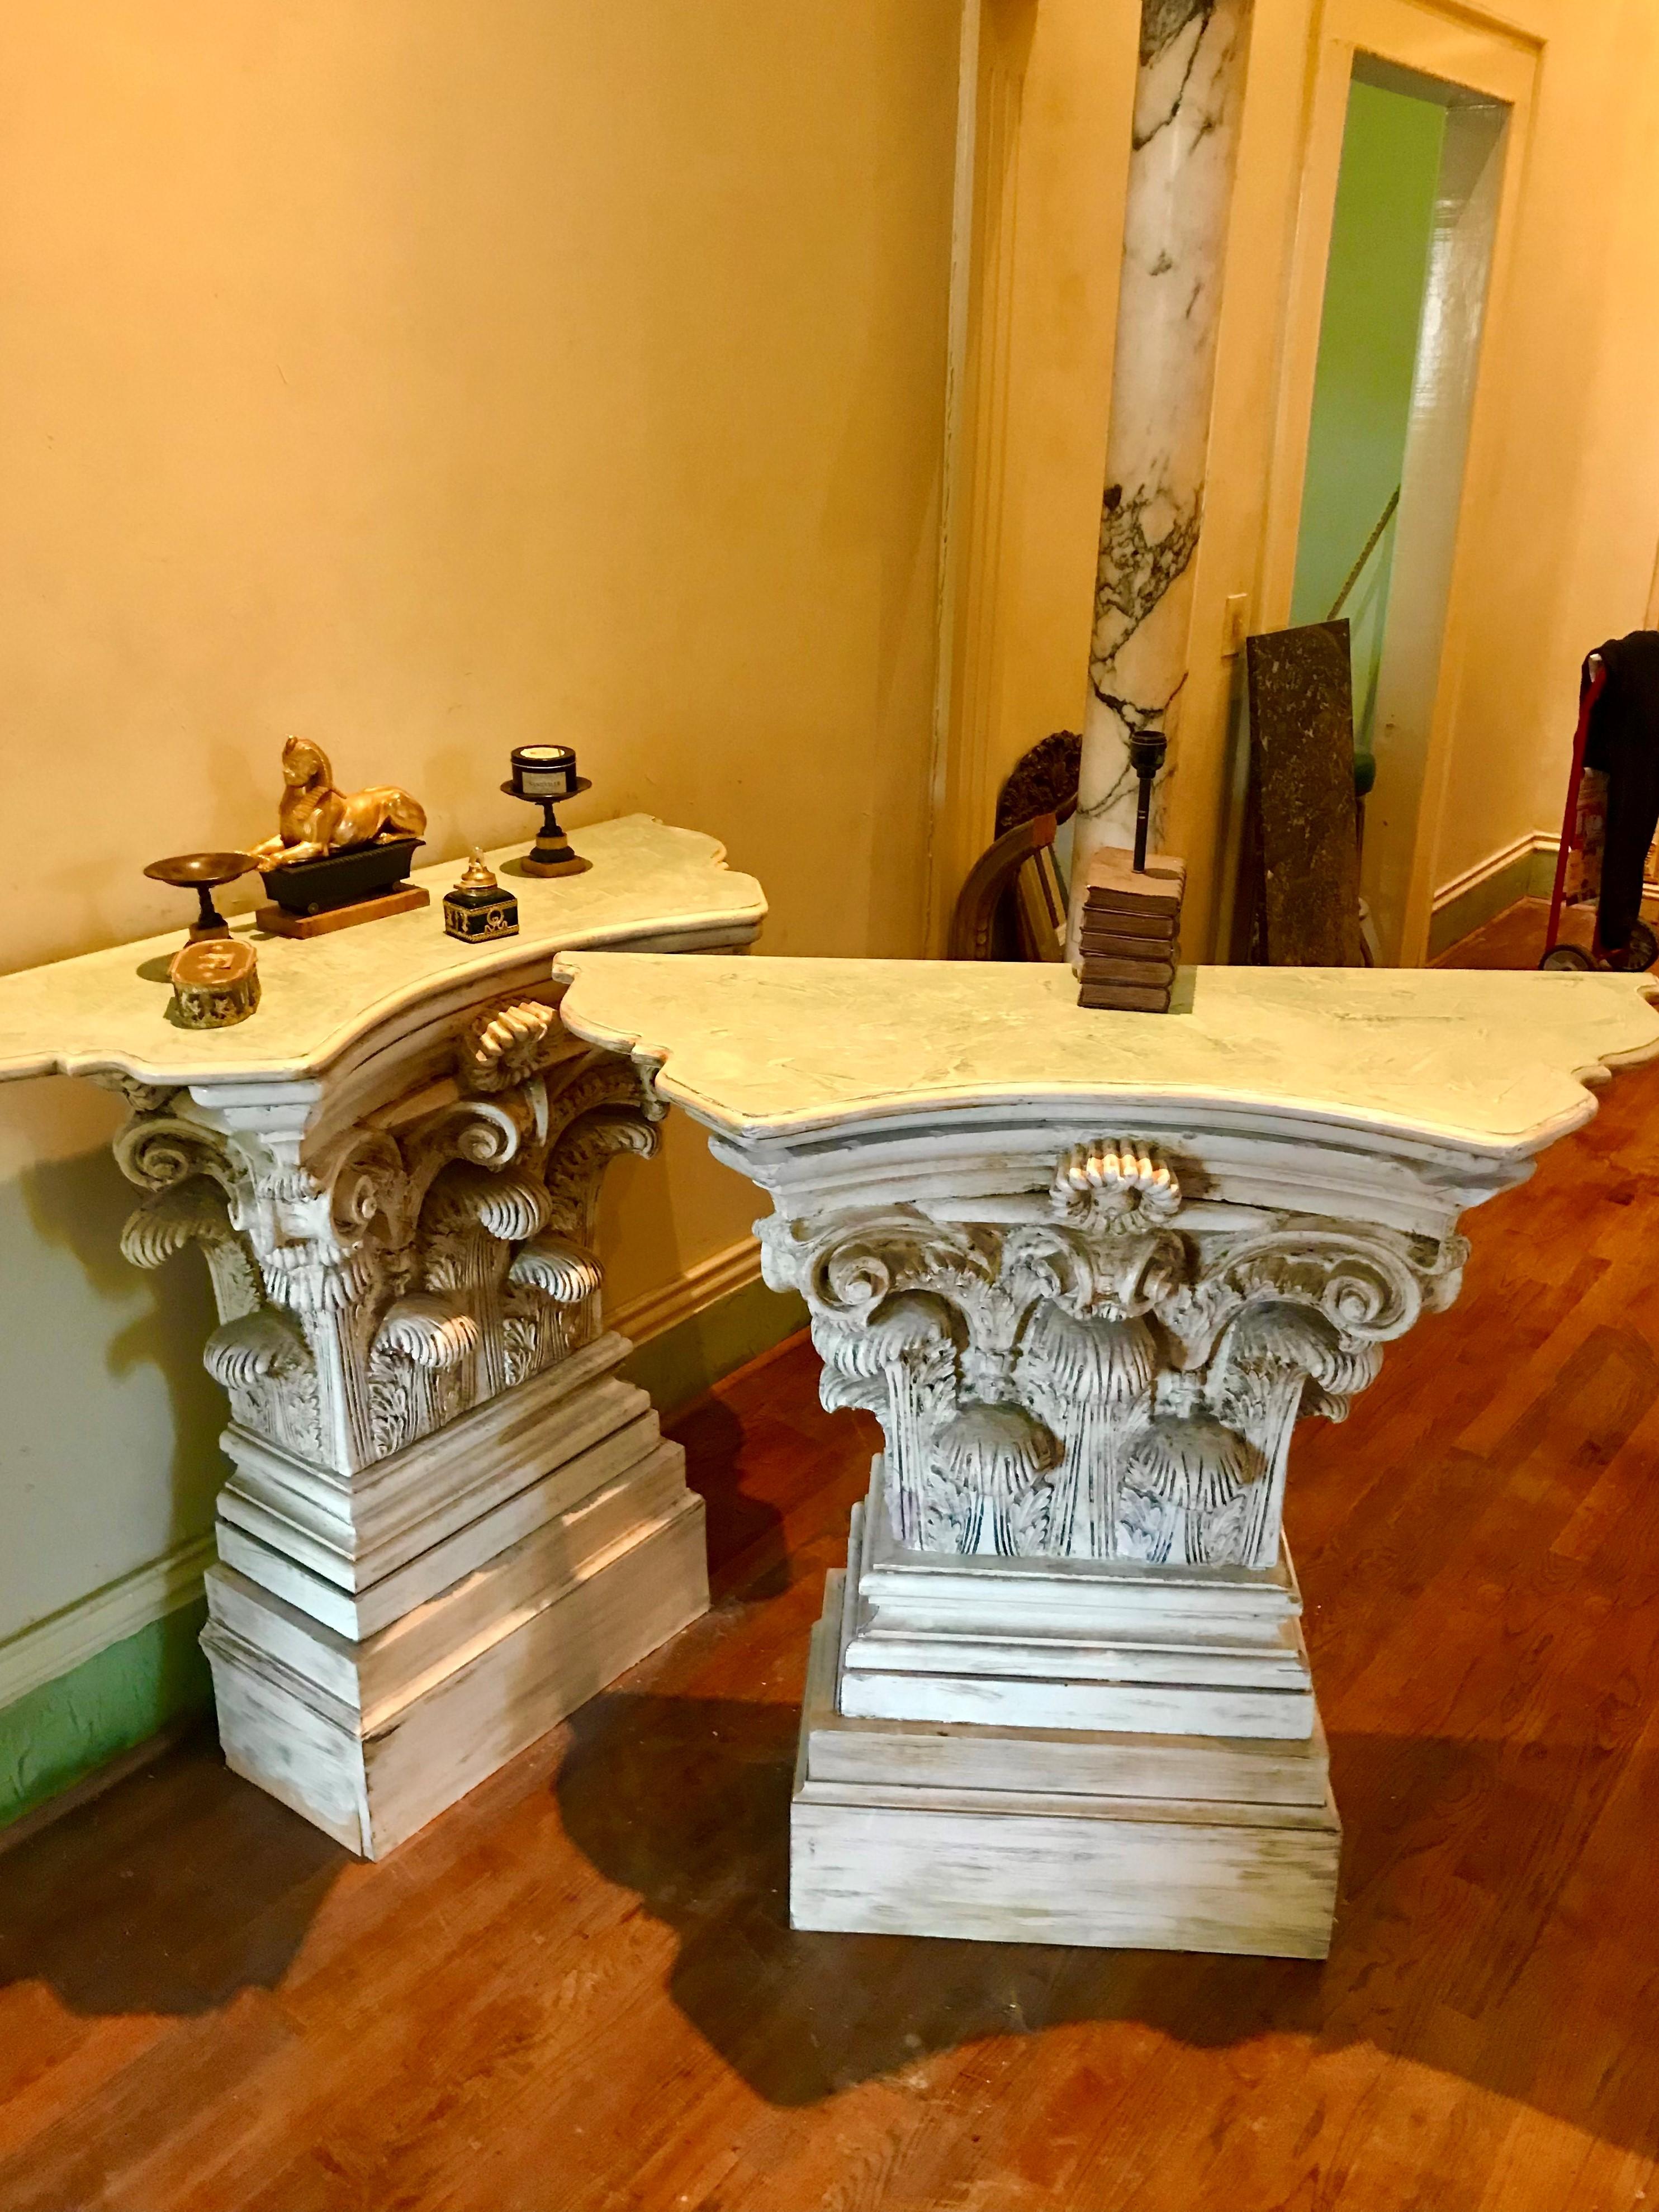 Pair of large consoles of Corinthian capital form, probably inspired by The Grand Tour souvenirs of the Roman Forum. Strong presence due to size and design but well formed, deeply cast and detail chased, Each with a faux marbleized top mint green